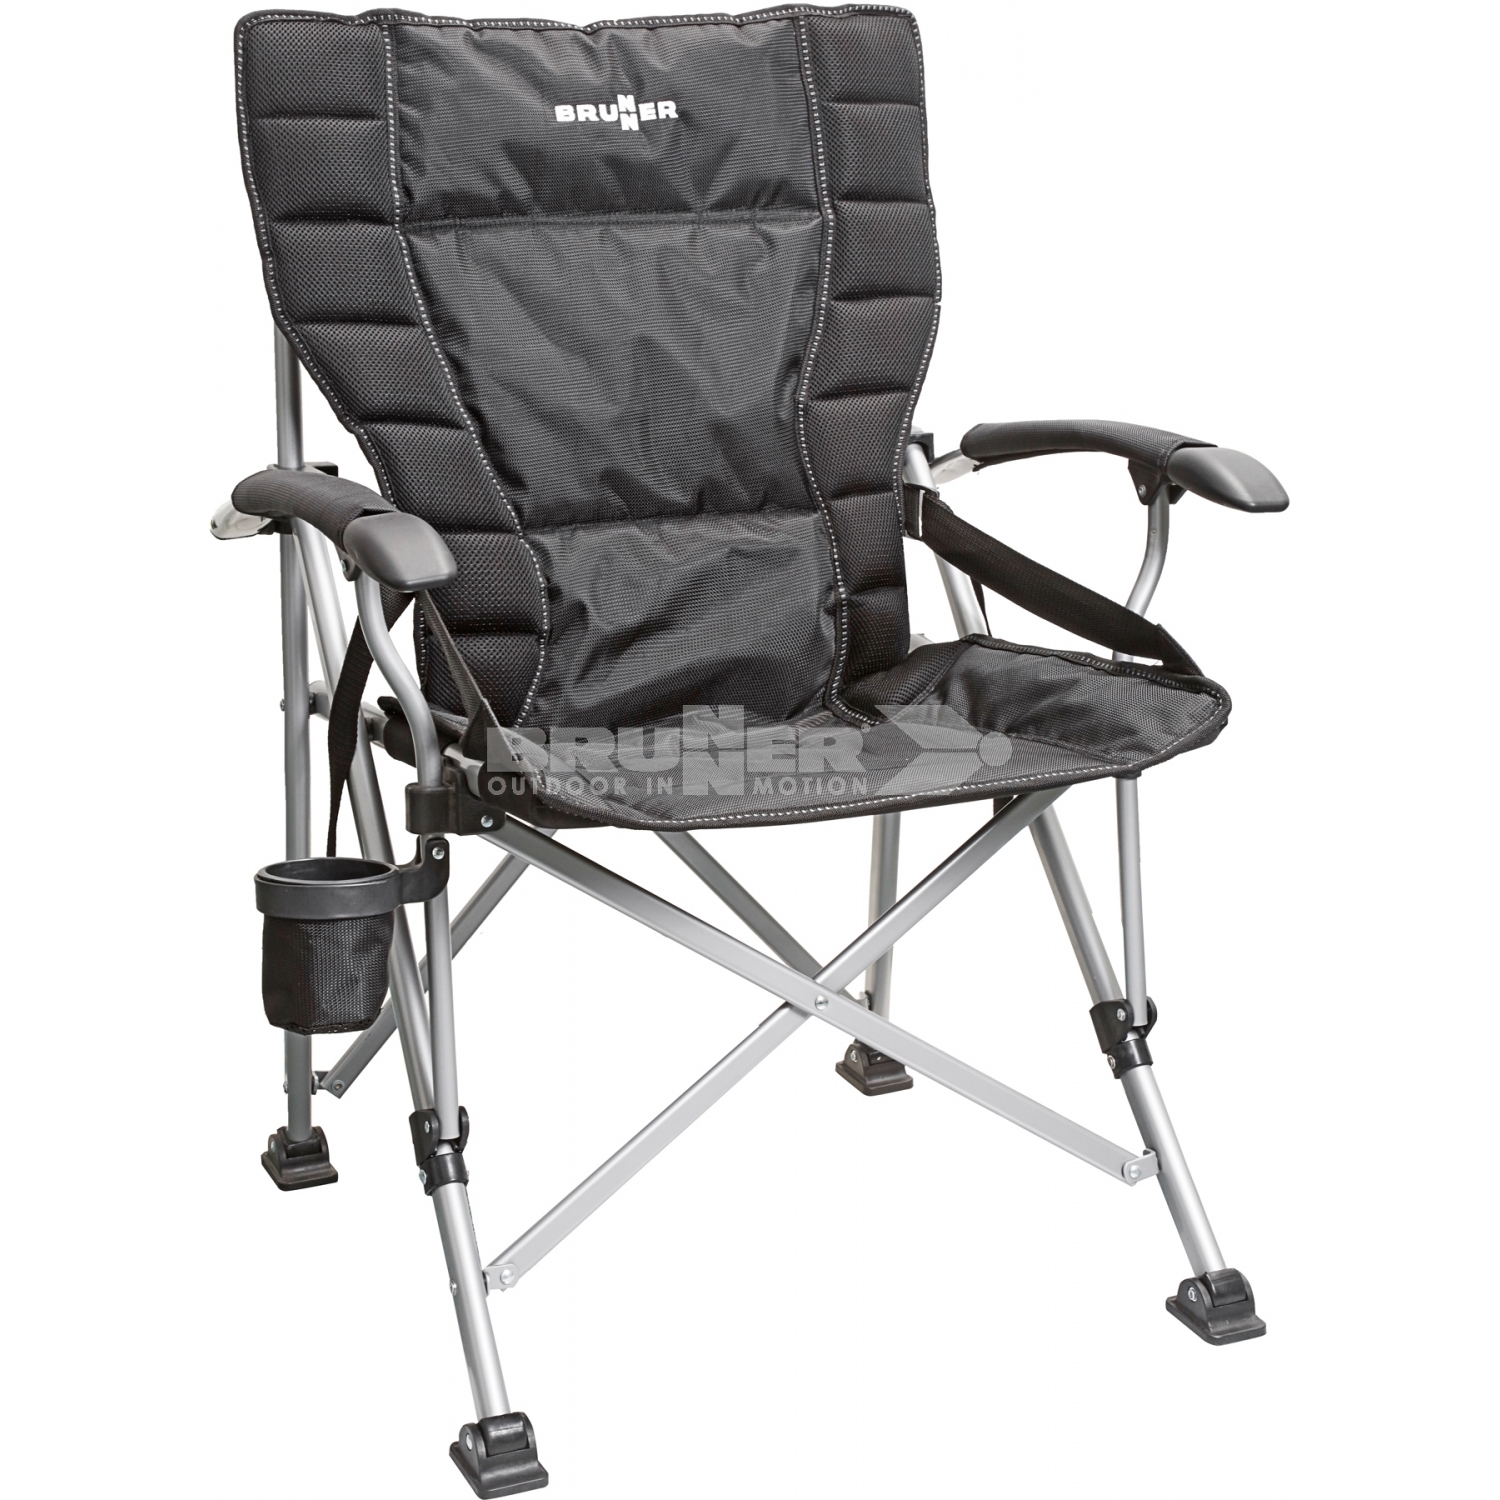 Brunner Raptor XL Folding Camping Chair ( Extra Large )